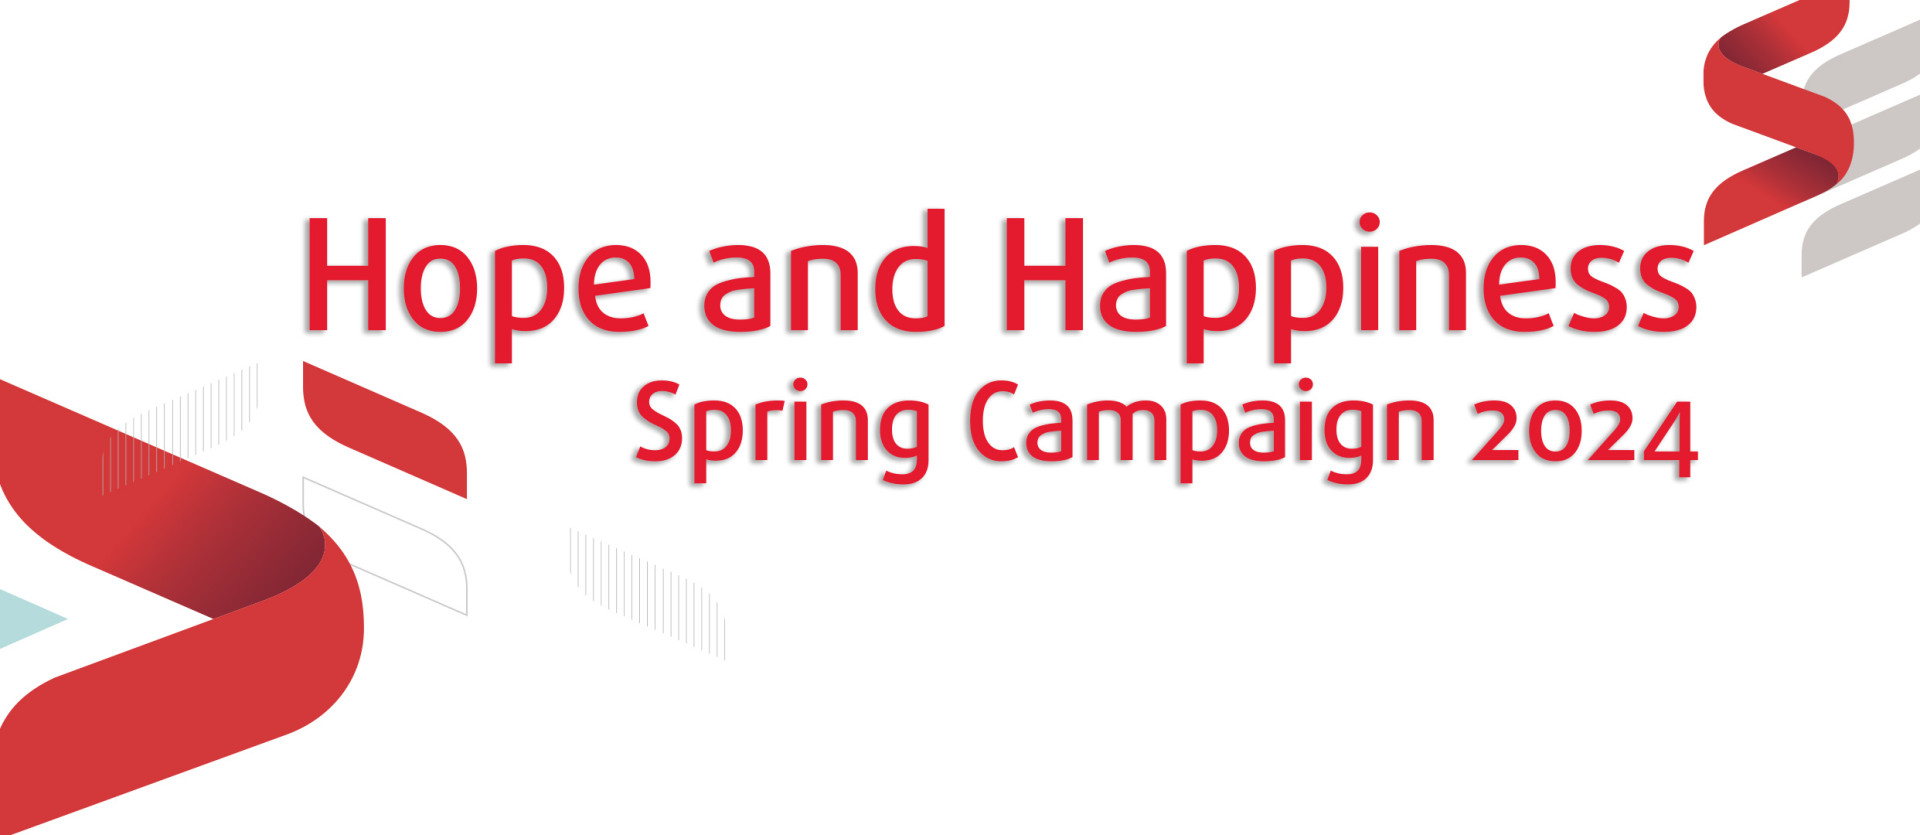 Hope and Happiness Spring Campaign 2024